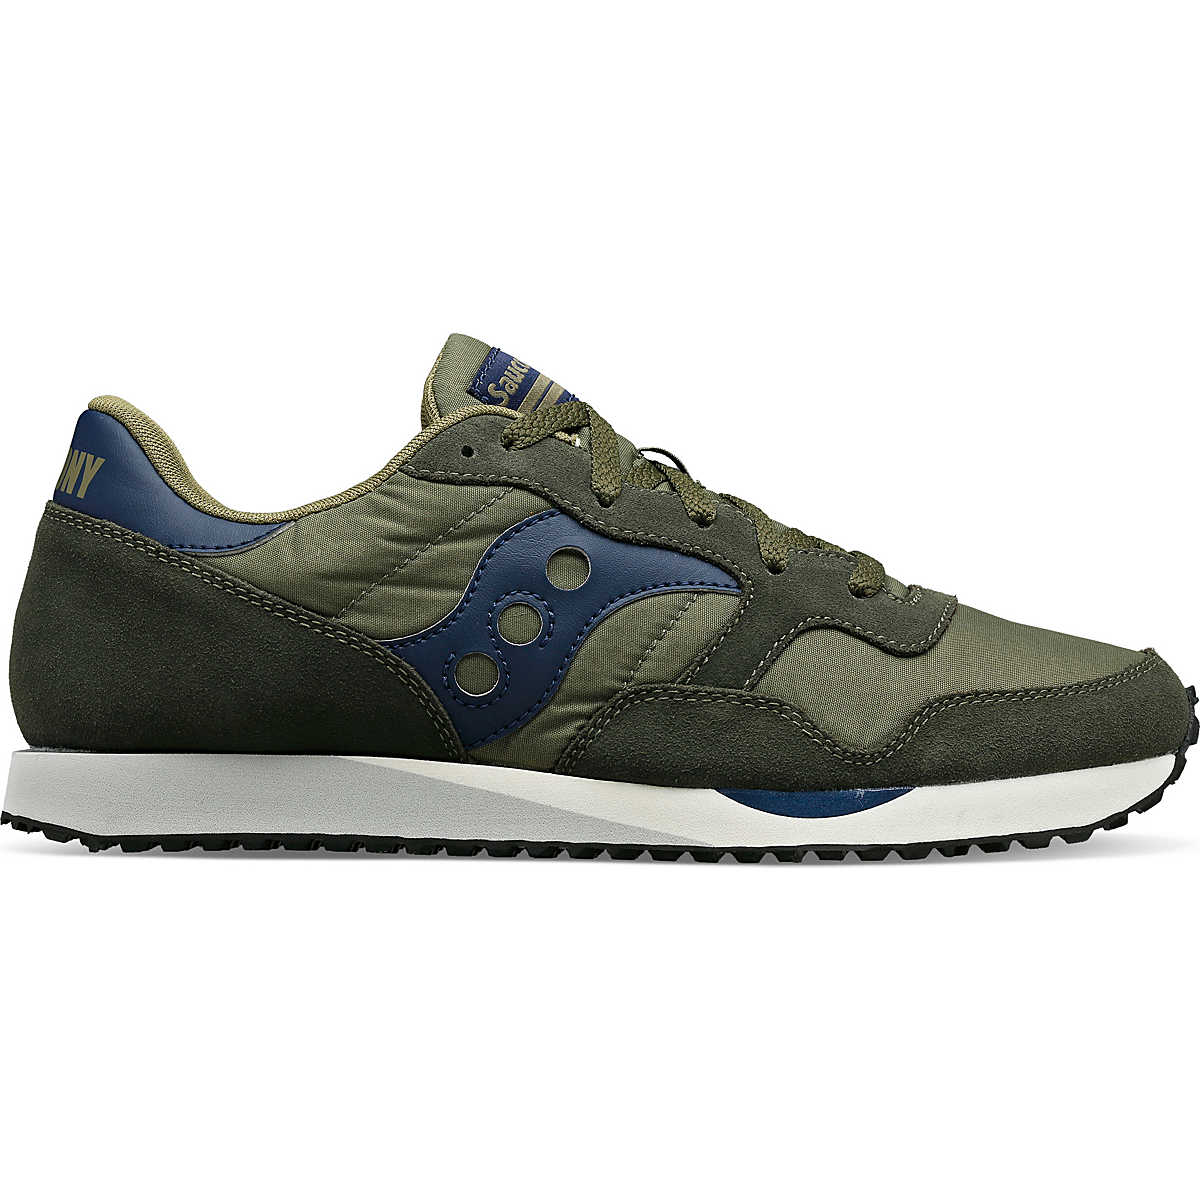 DXN Trainer, Green | Navy, dynamic 1